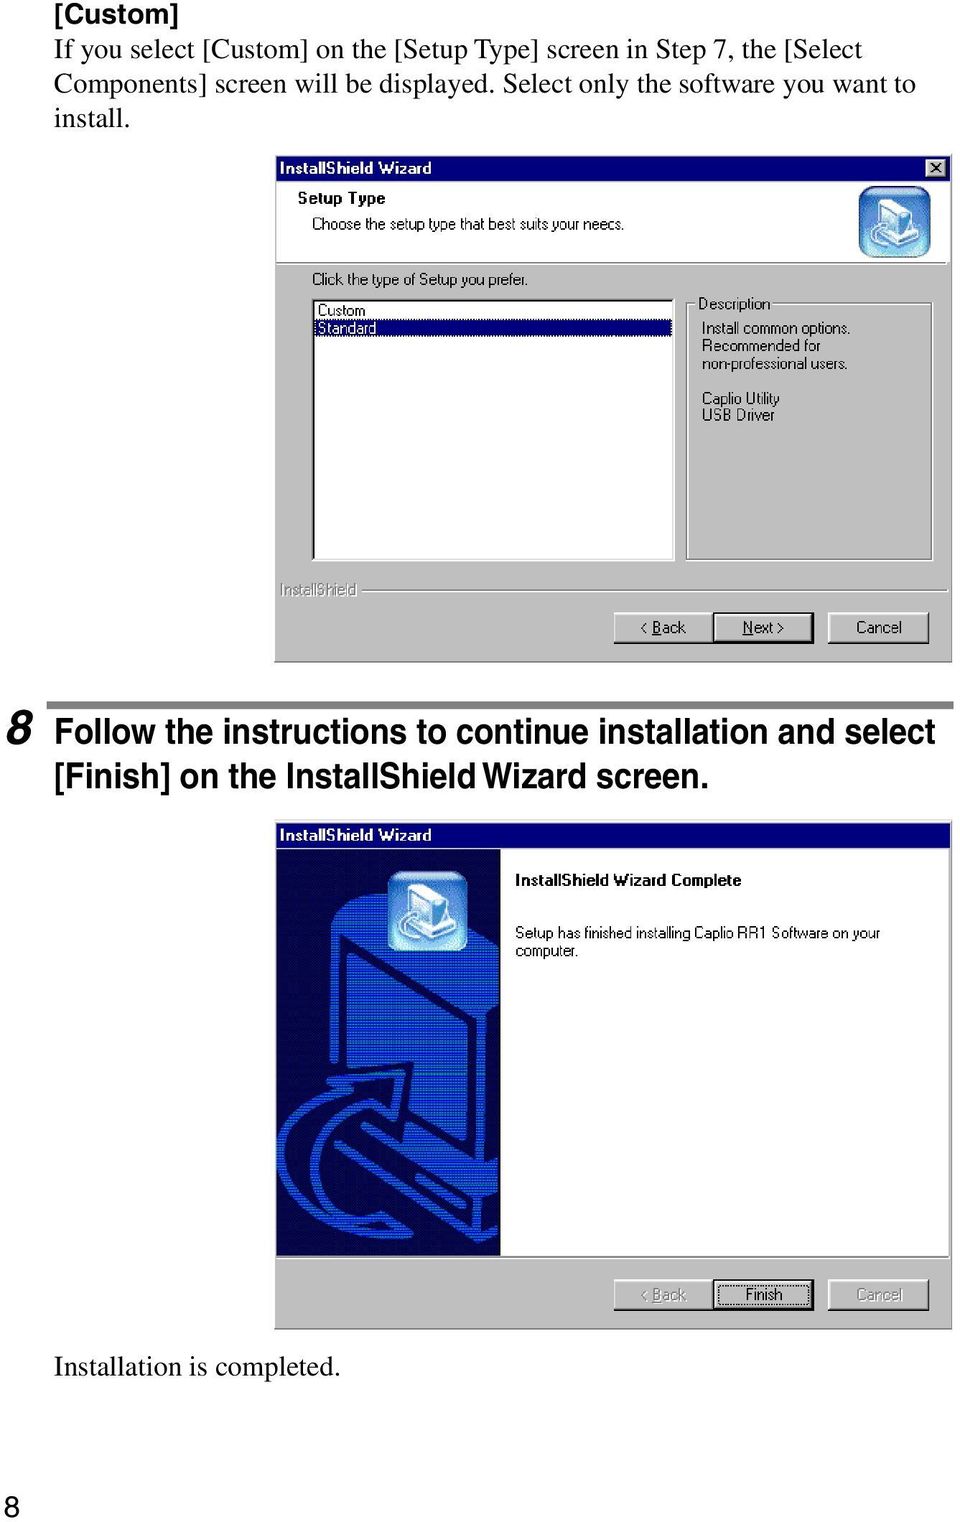 Select only the software you want to install.